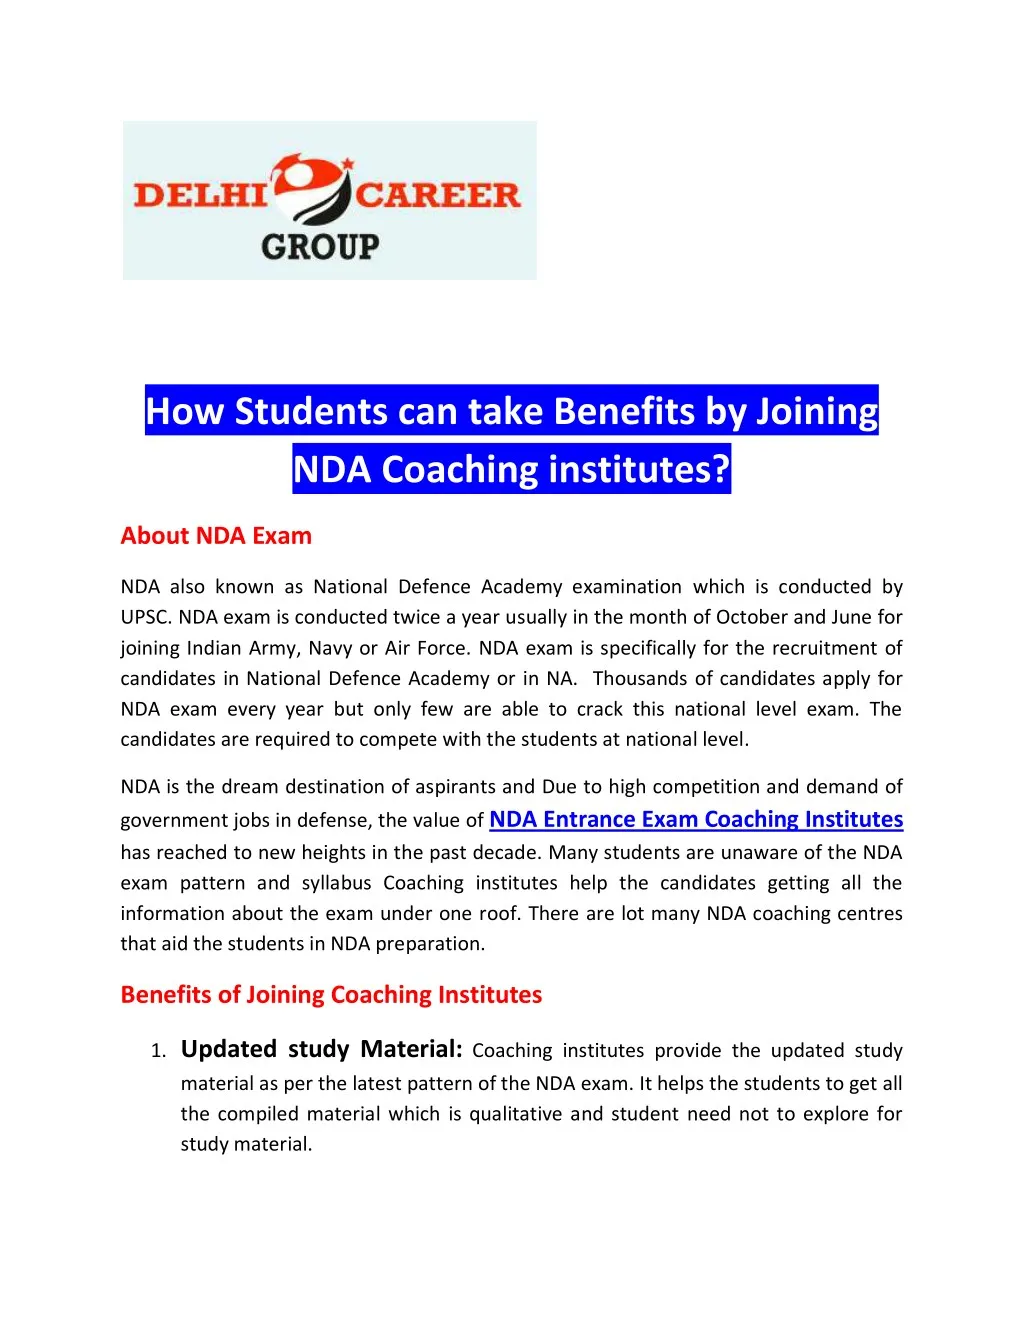 how students can take benefits by joining